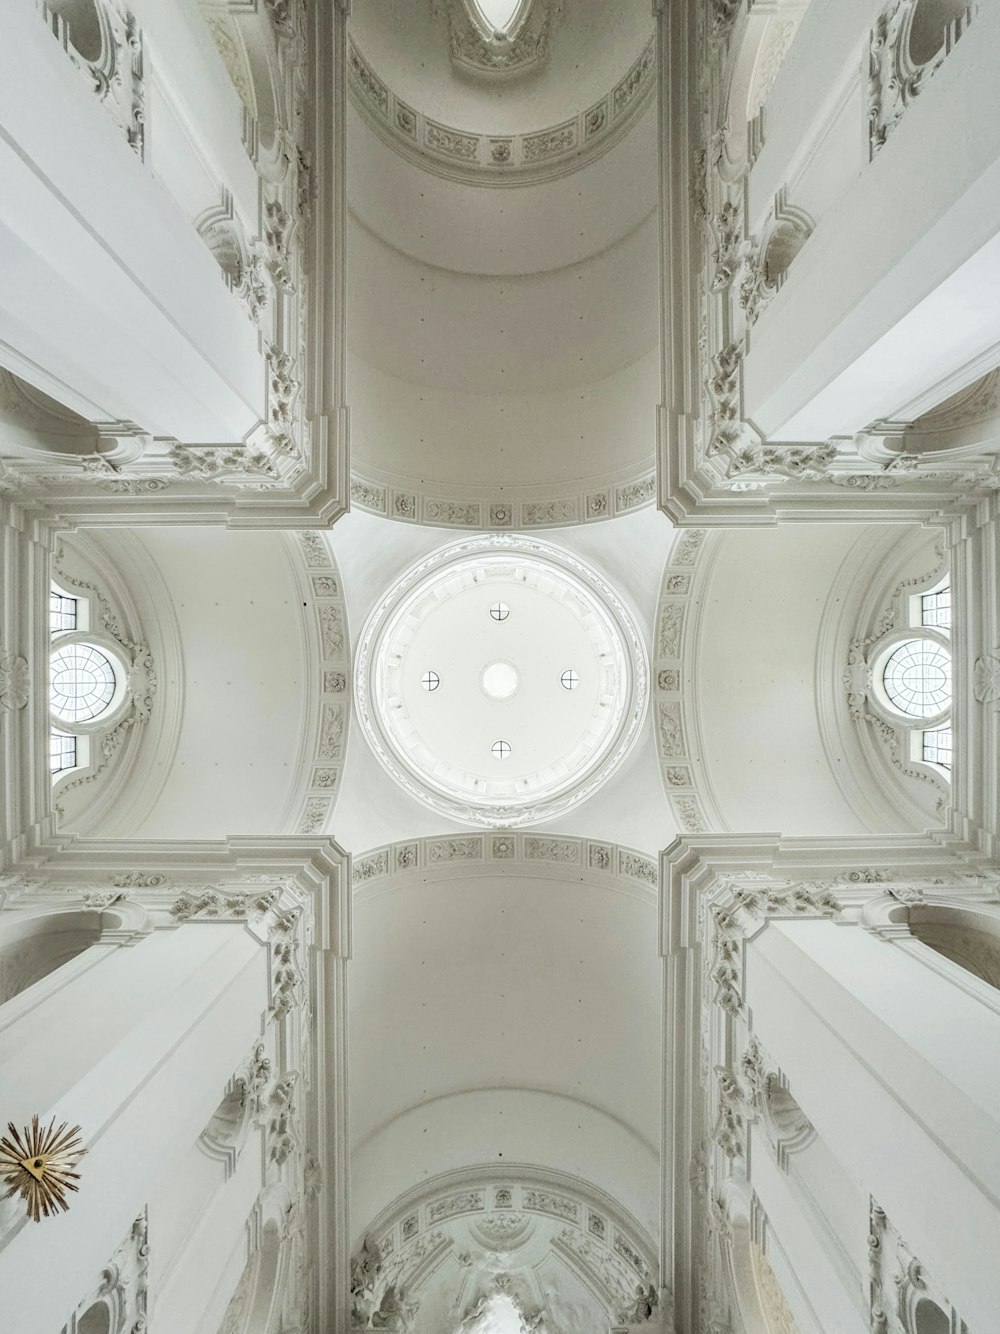 the ceiling of a church with a circular window